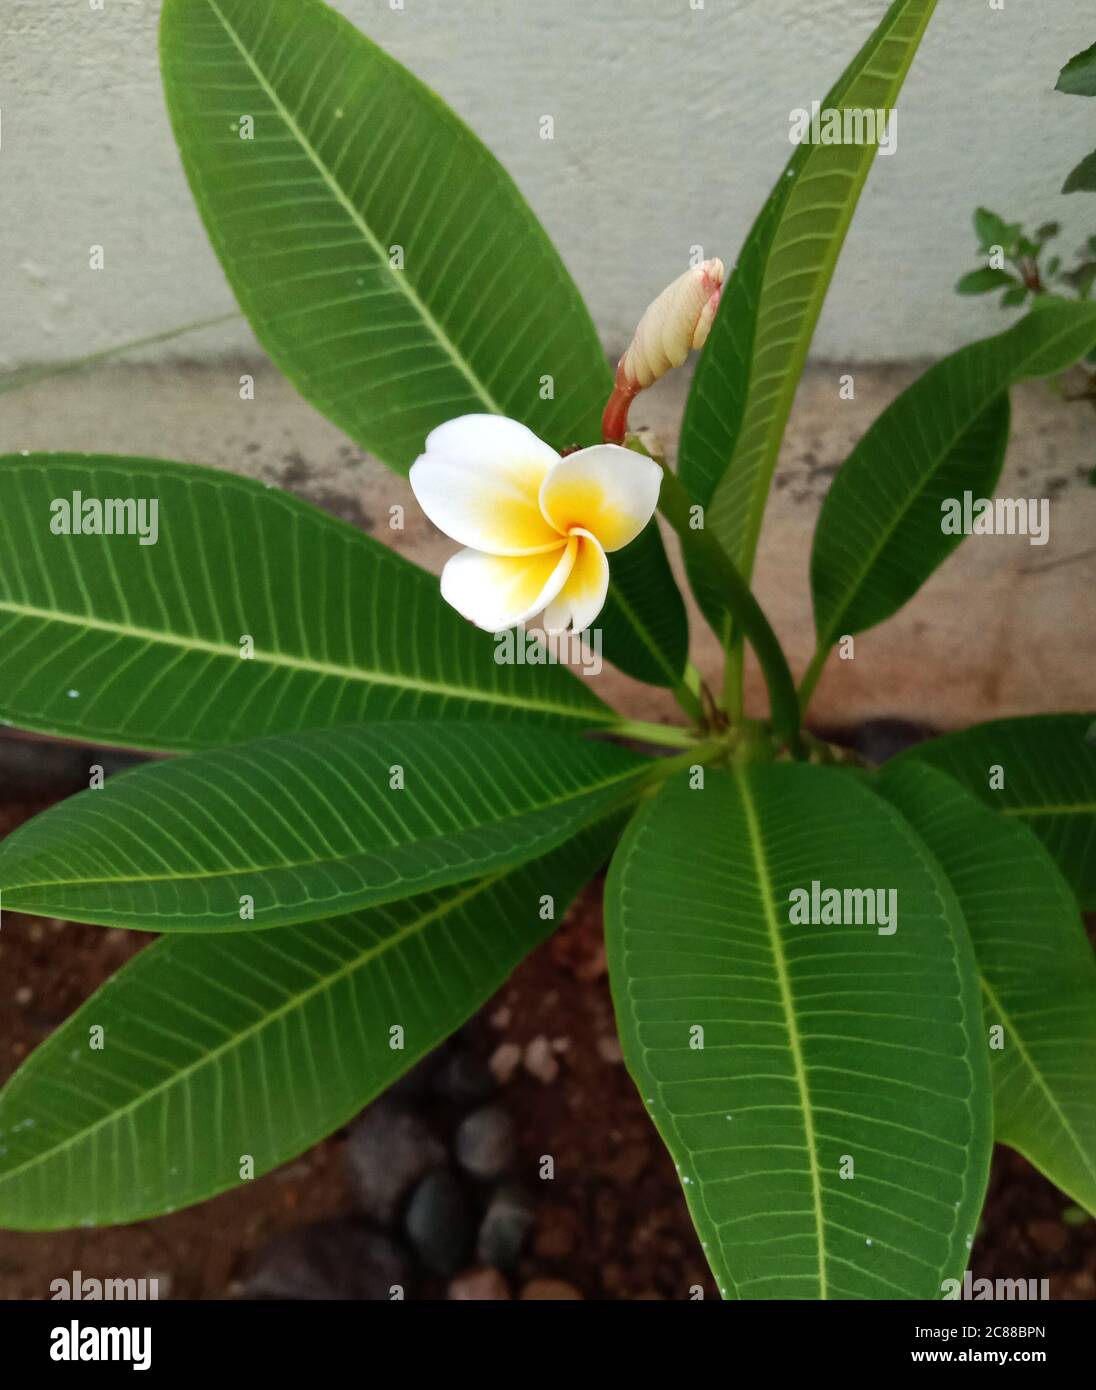 Plumeria or champa flower is a medicinal plant . used to make scent. Stock Photo